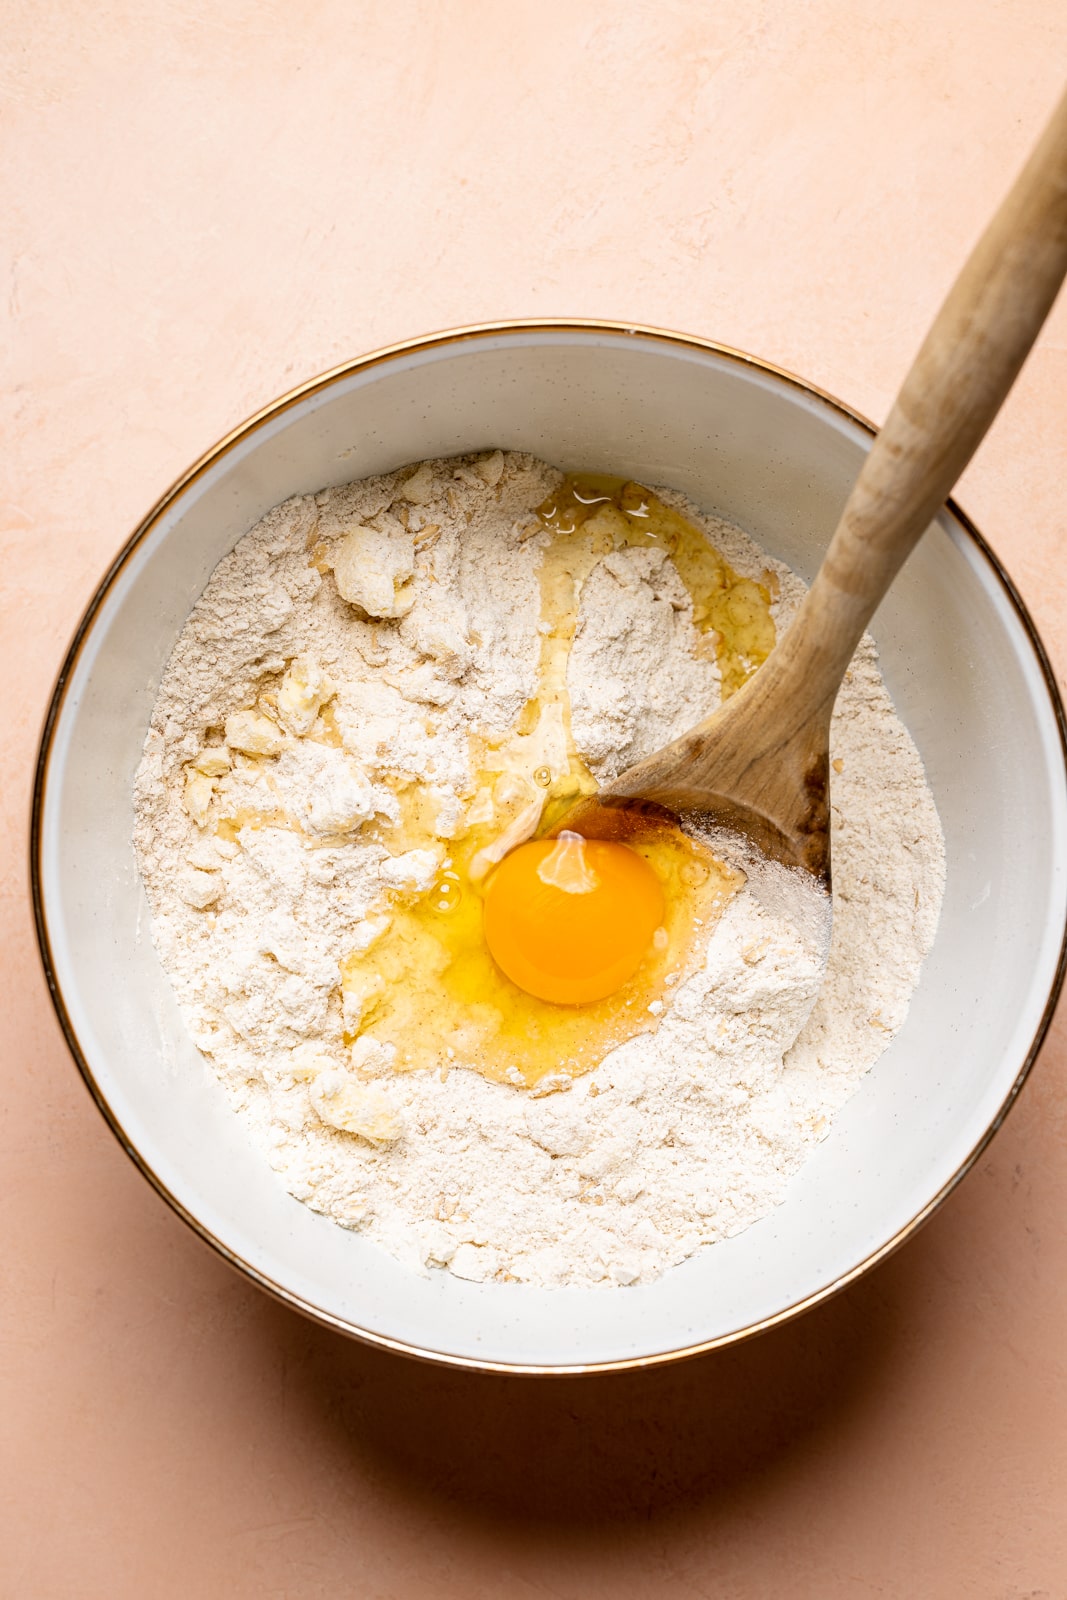 Dry ingredients in a large white bowl with eggs and a wooden spoon on a peach table.